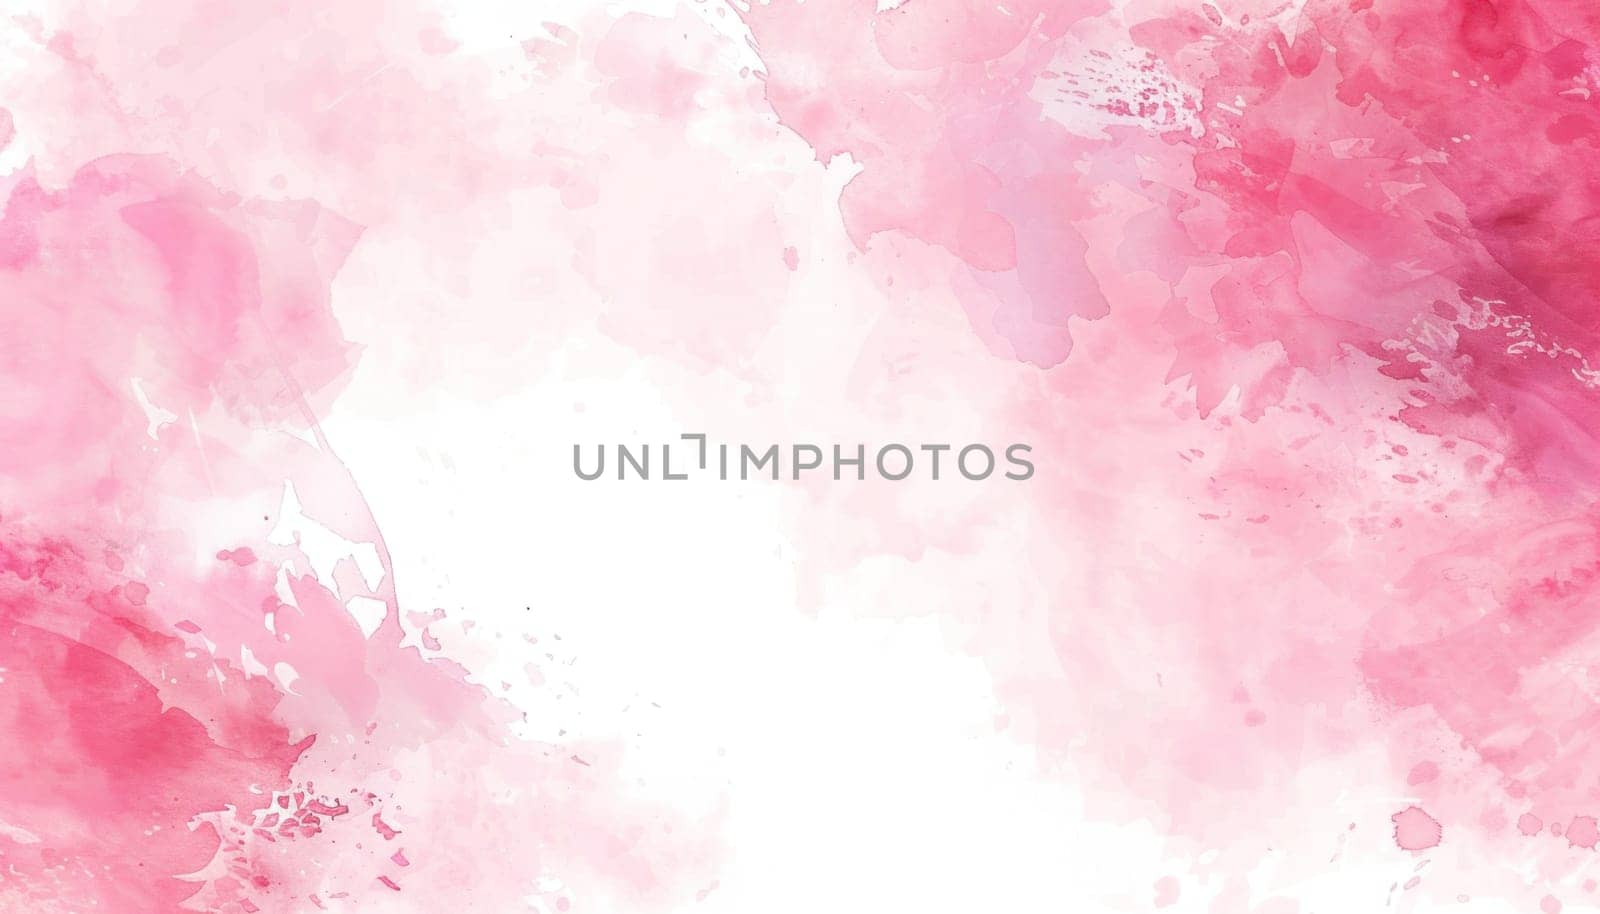 Abstract watercolor pink background with white space for text or image, ideal for travel or beauty concepts